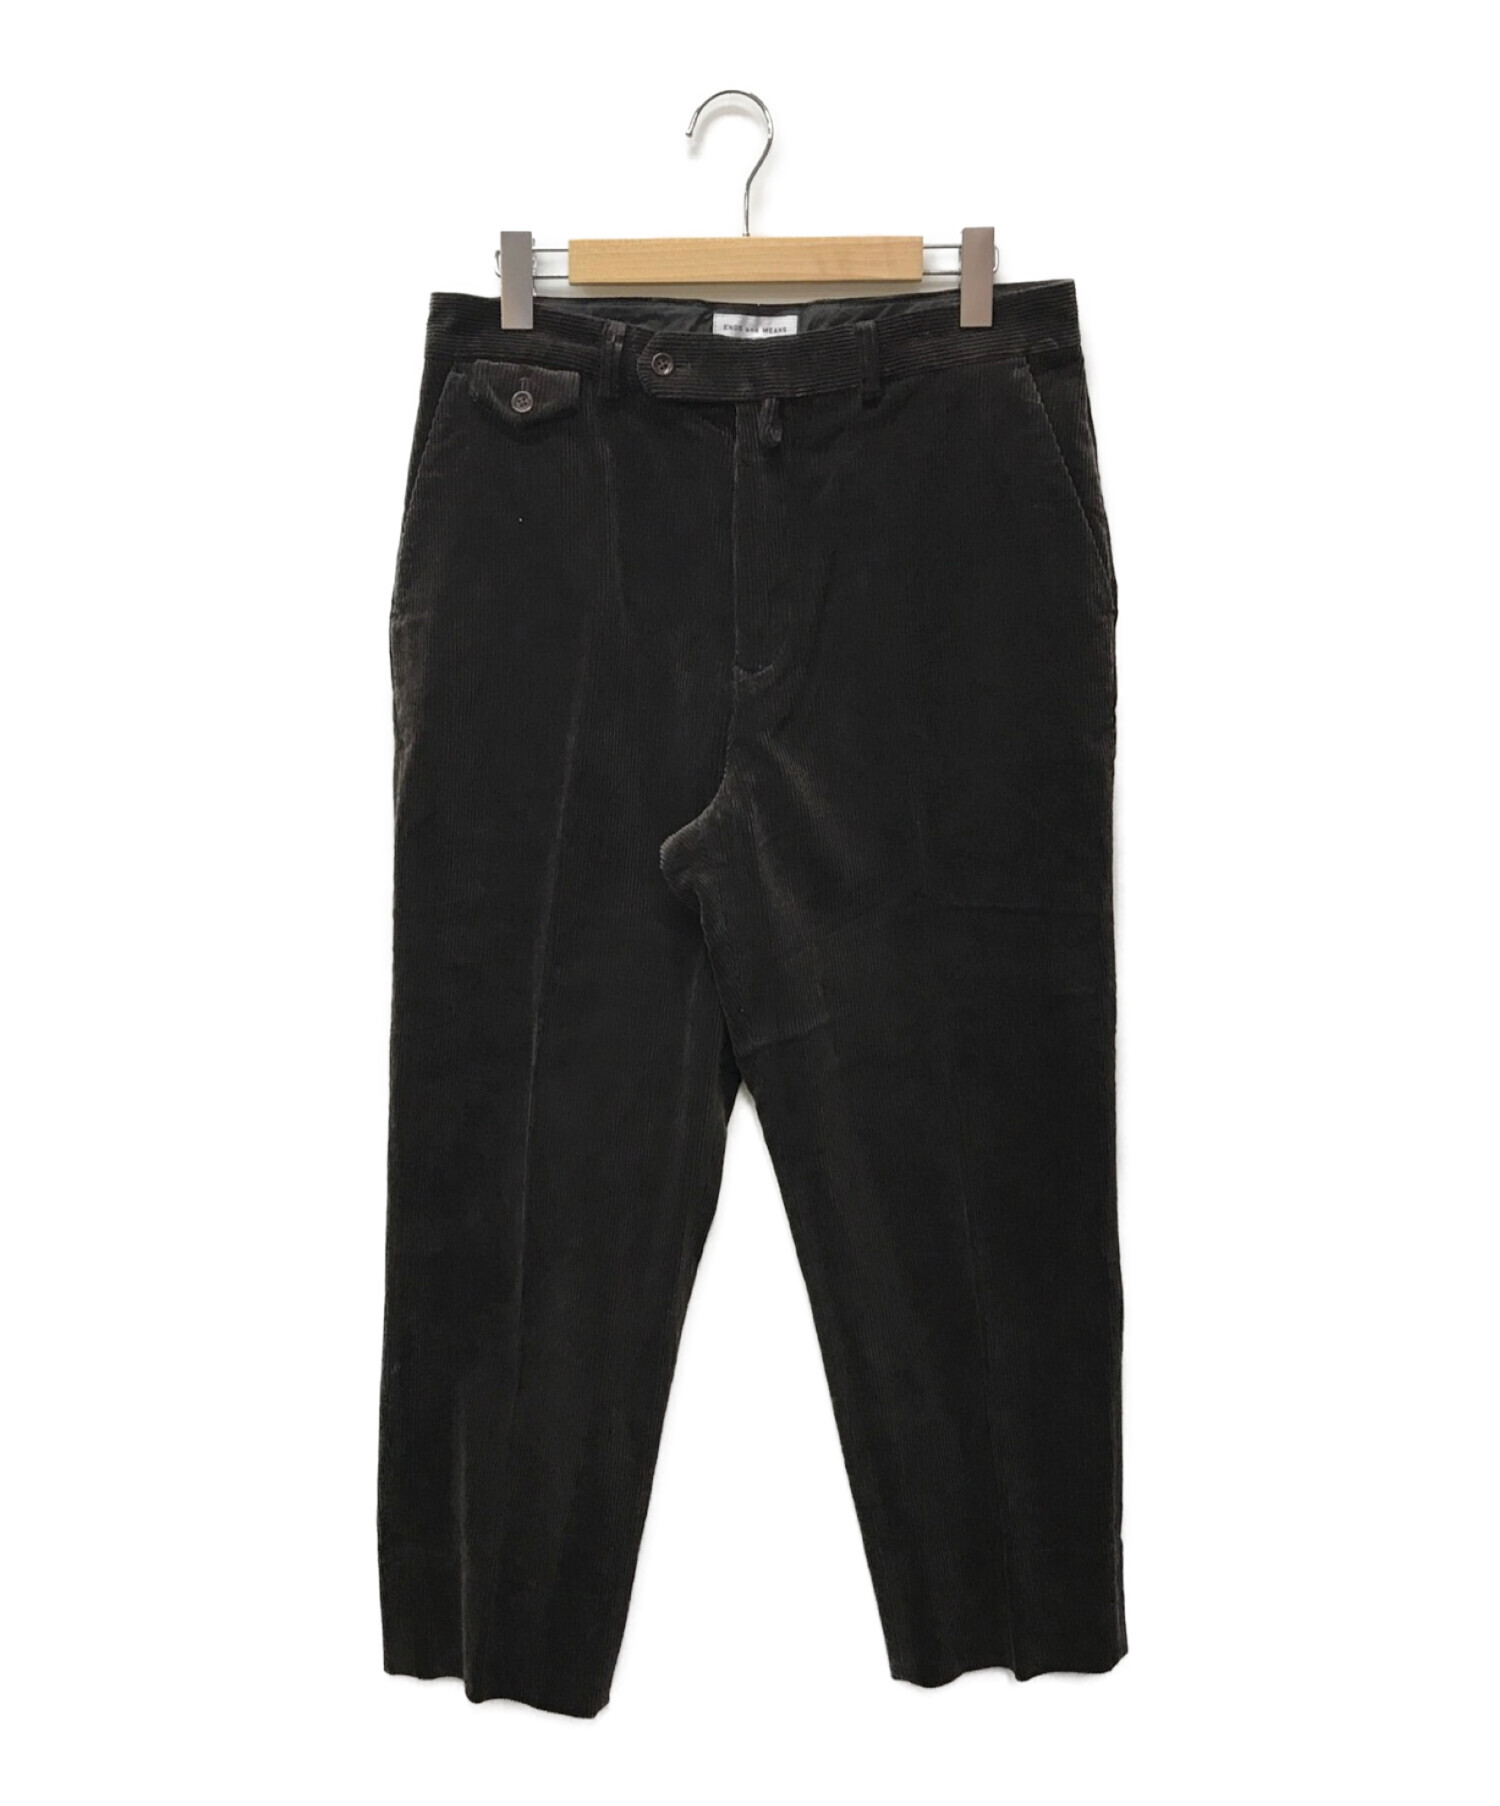 ENDS AND MEANS (エンズアンド ミーンズ) Standard Grandpa Cord Trousers ブラウン サイズ:L